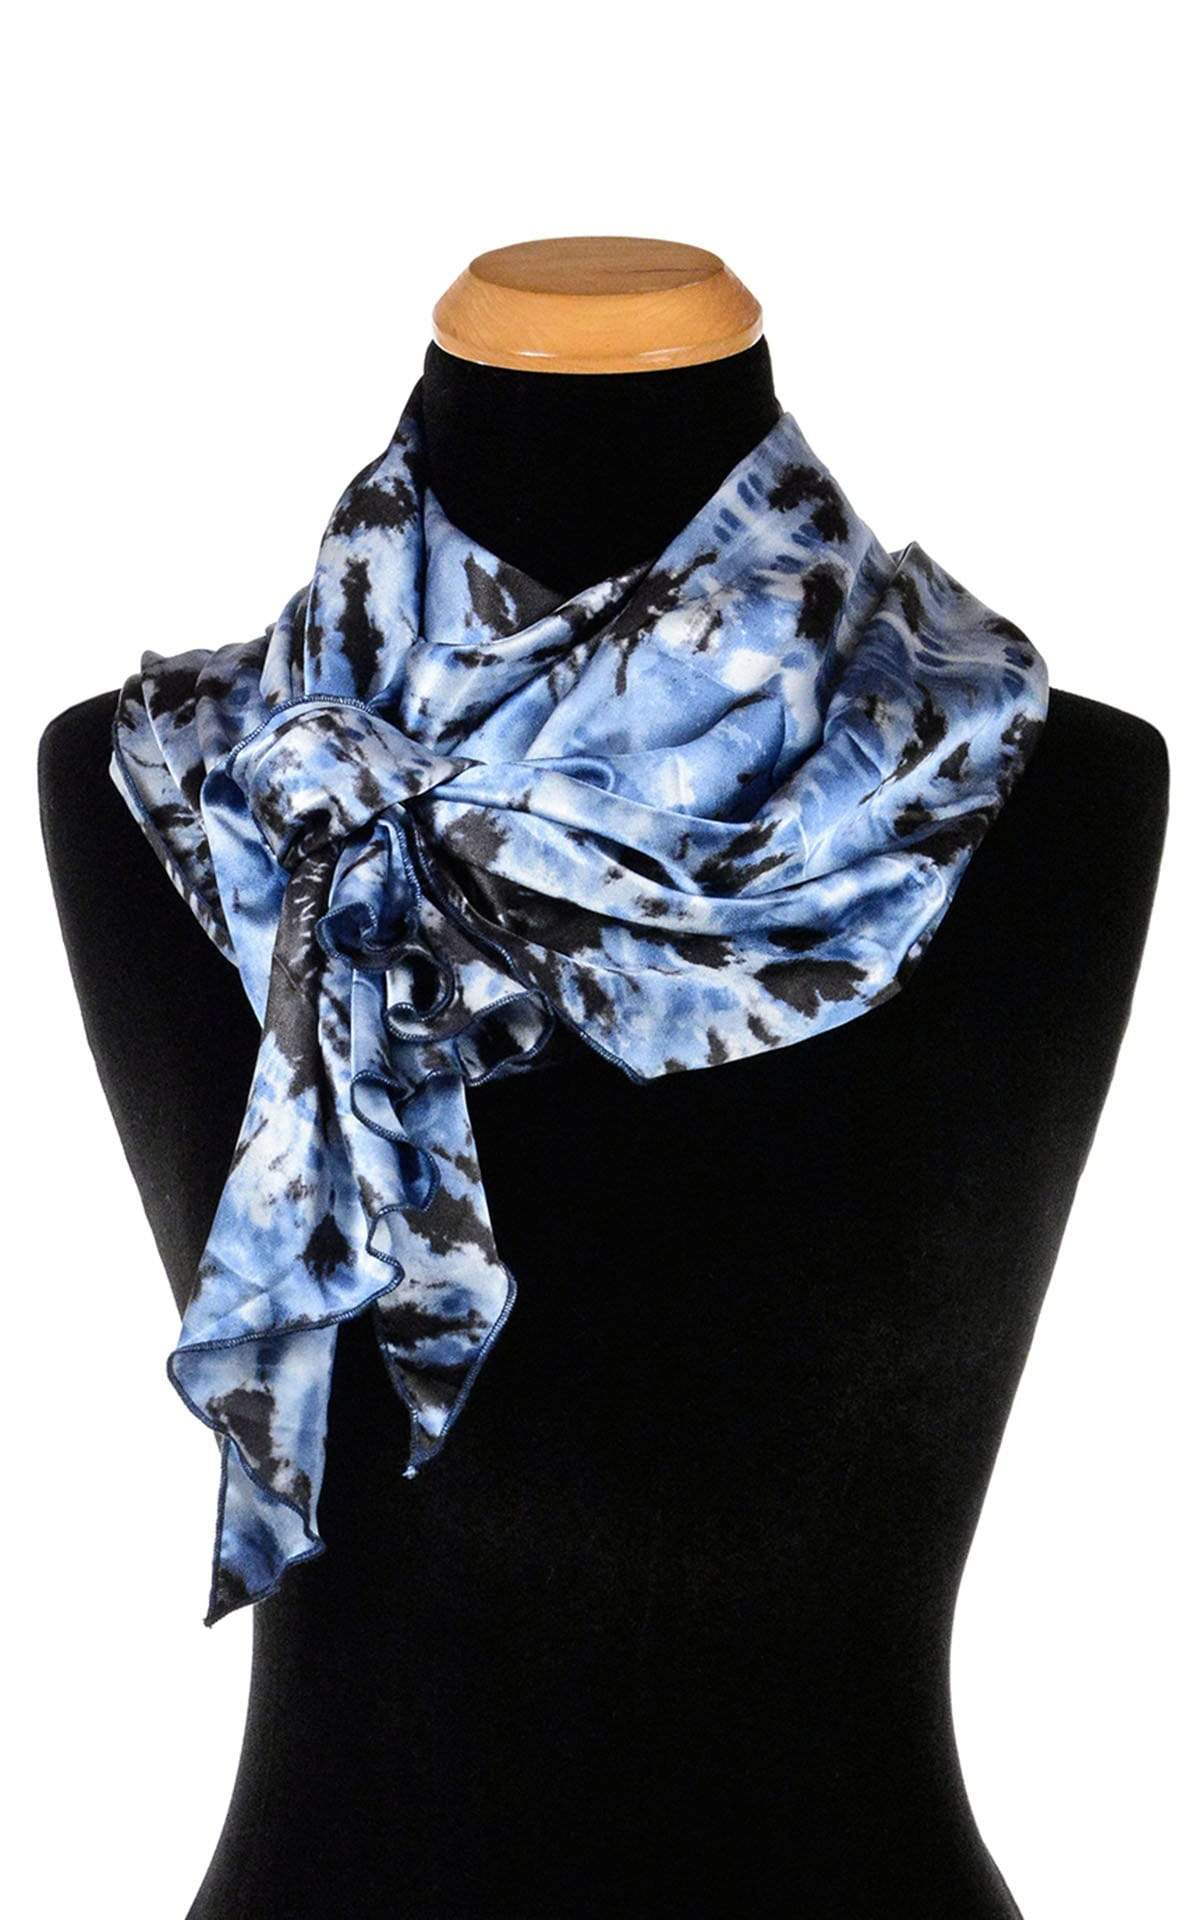 Ladies Large Handkerchief Scarf, Wrap on mannequin Tied in Front | Egyptian Mirage, black, Blues, and ivory tie-dye | Handmade in Seattle WA | Pandemonium Millinery